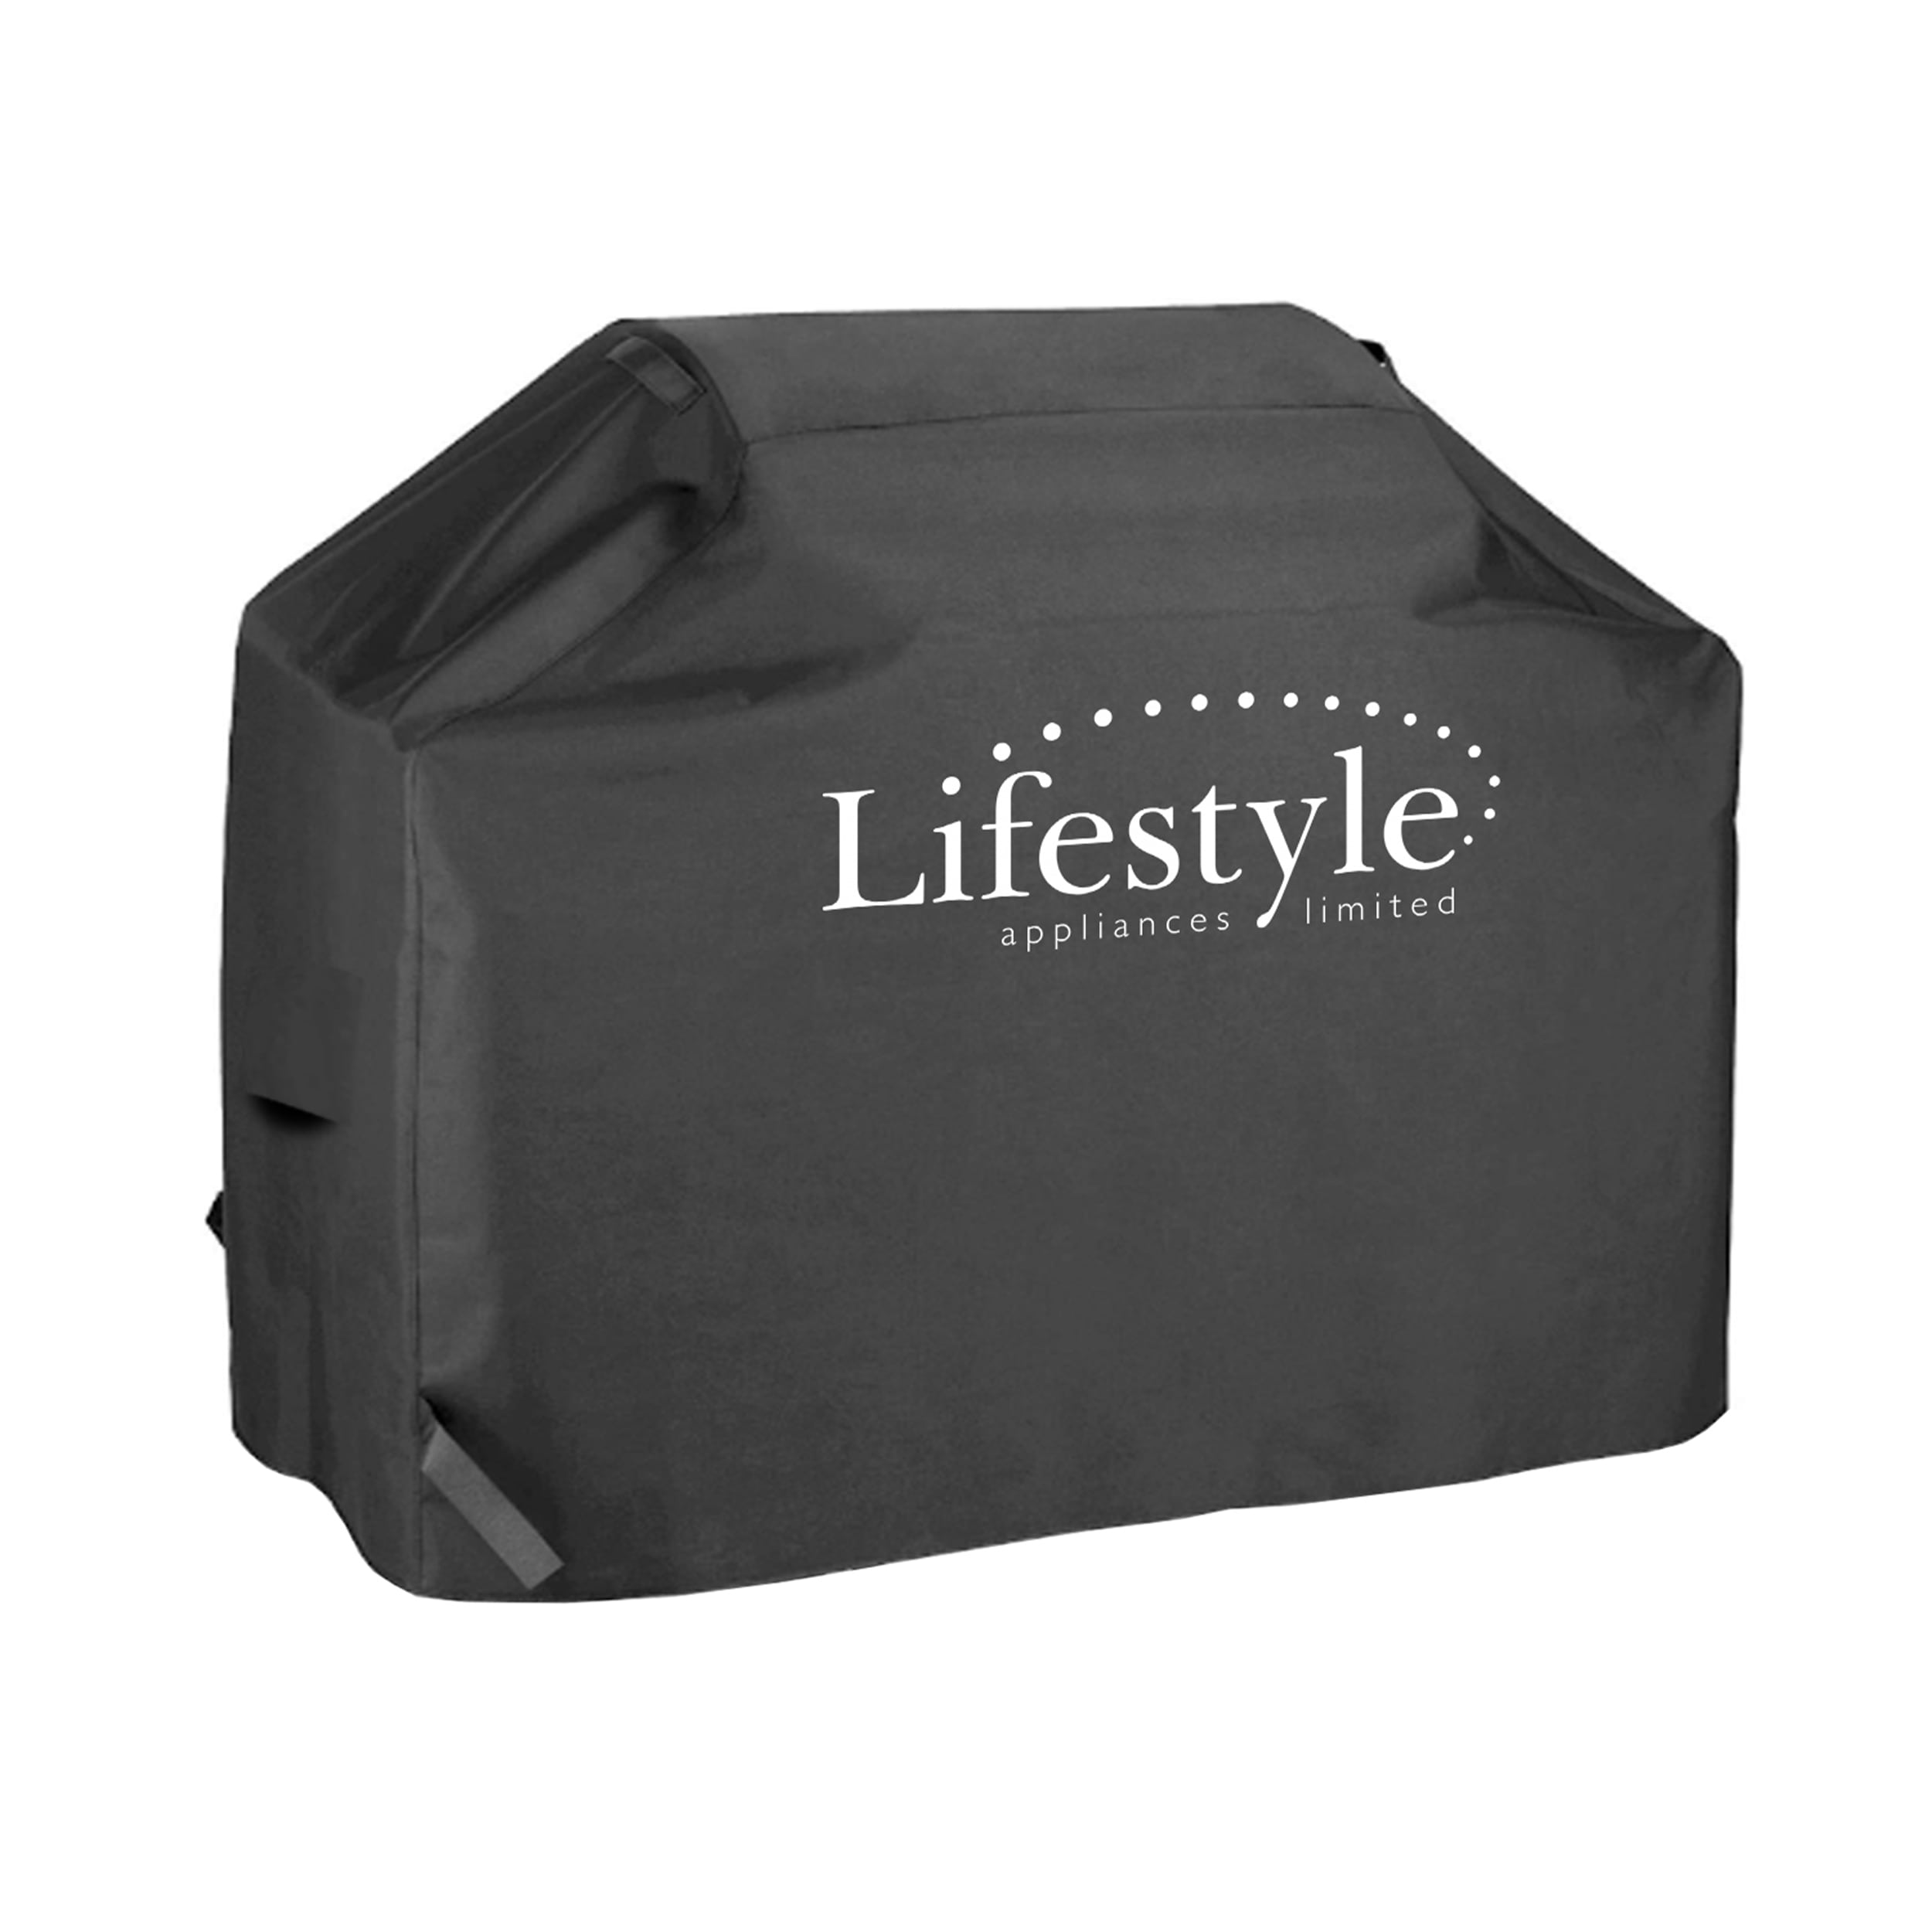 Lifestyle 5 Burner Hooded Cover - Glowing Flames